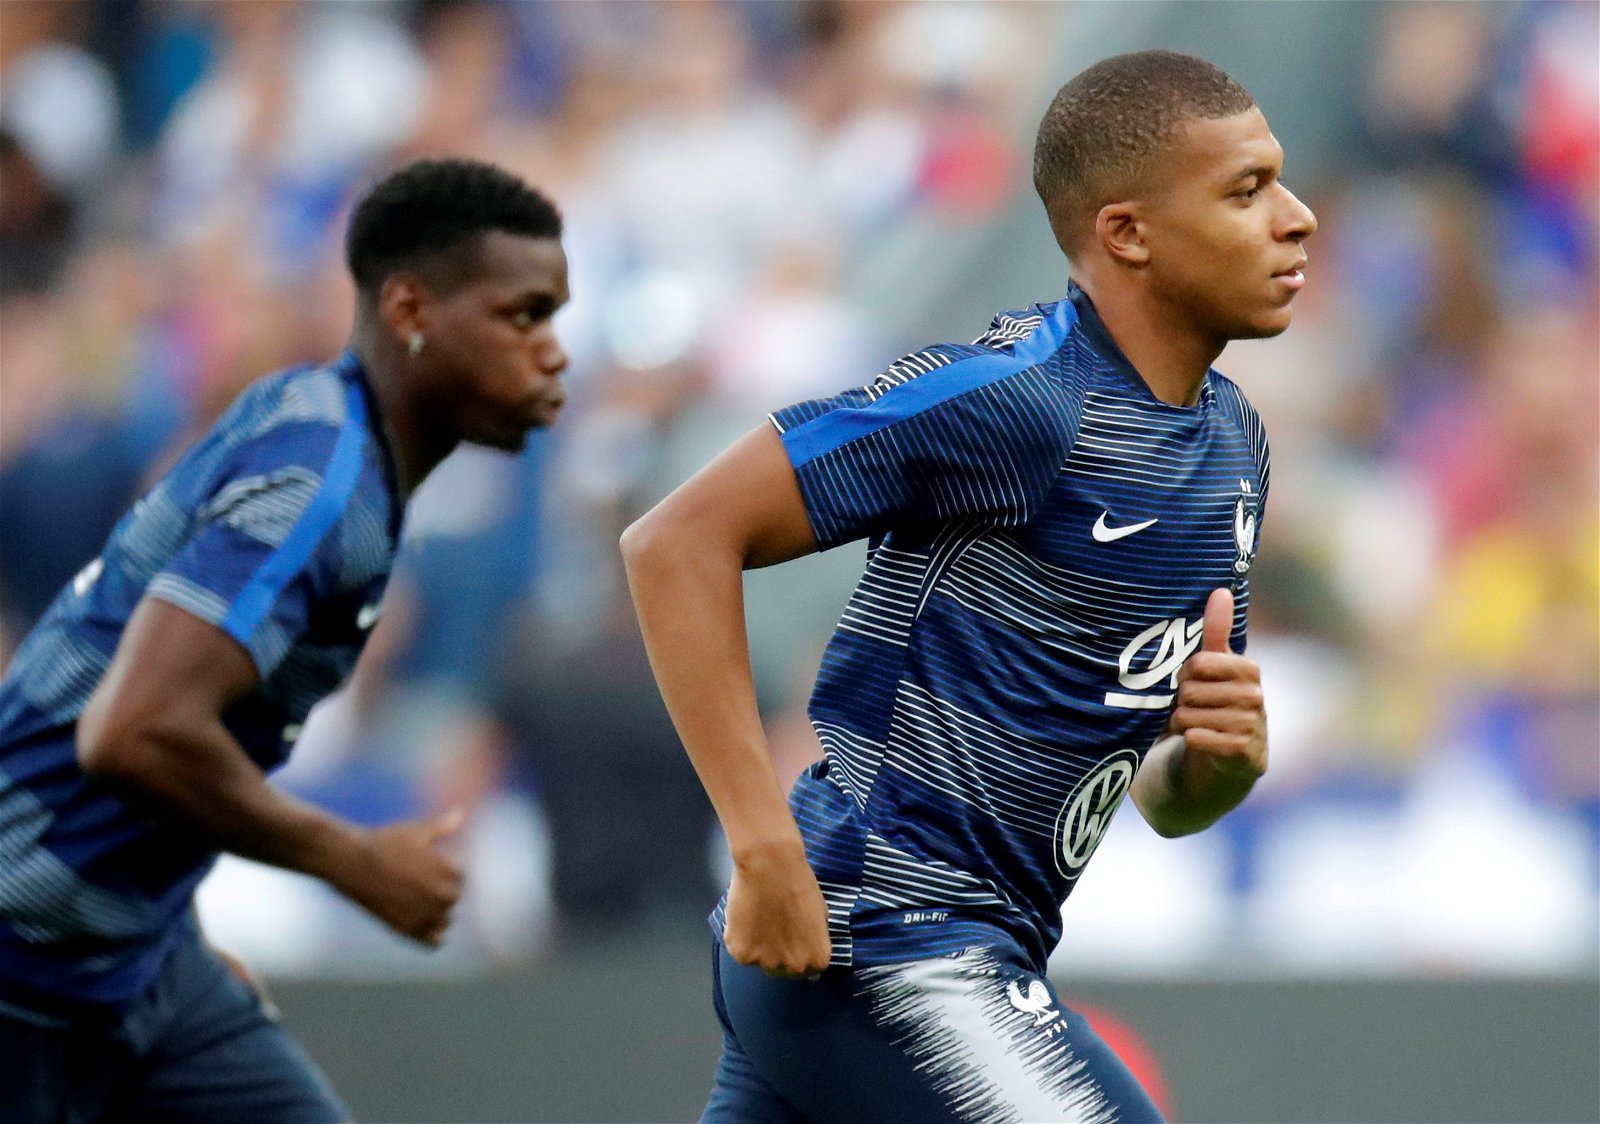 Real Madrid switch targets from Pogba to Mbappe - what is the deal at the Bernabeu?